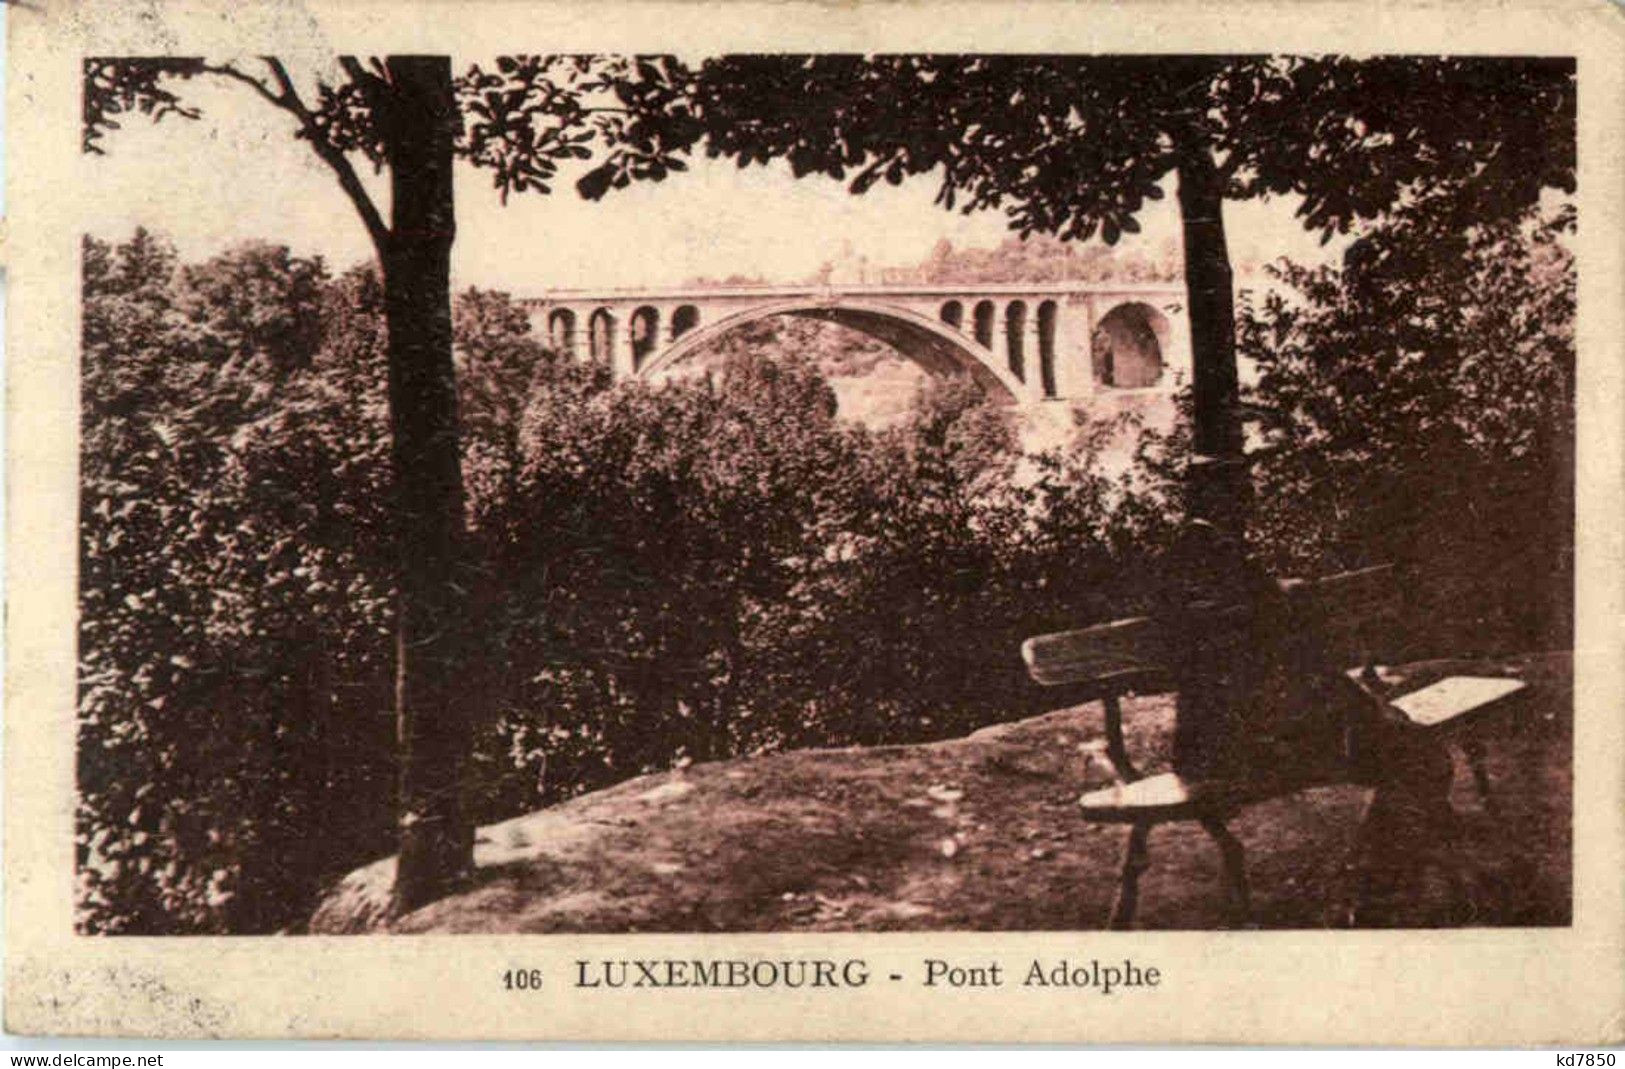 Ludembourg - Pont Adolphe - Luxemburg - Town